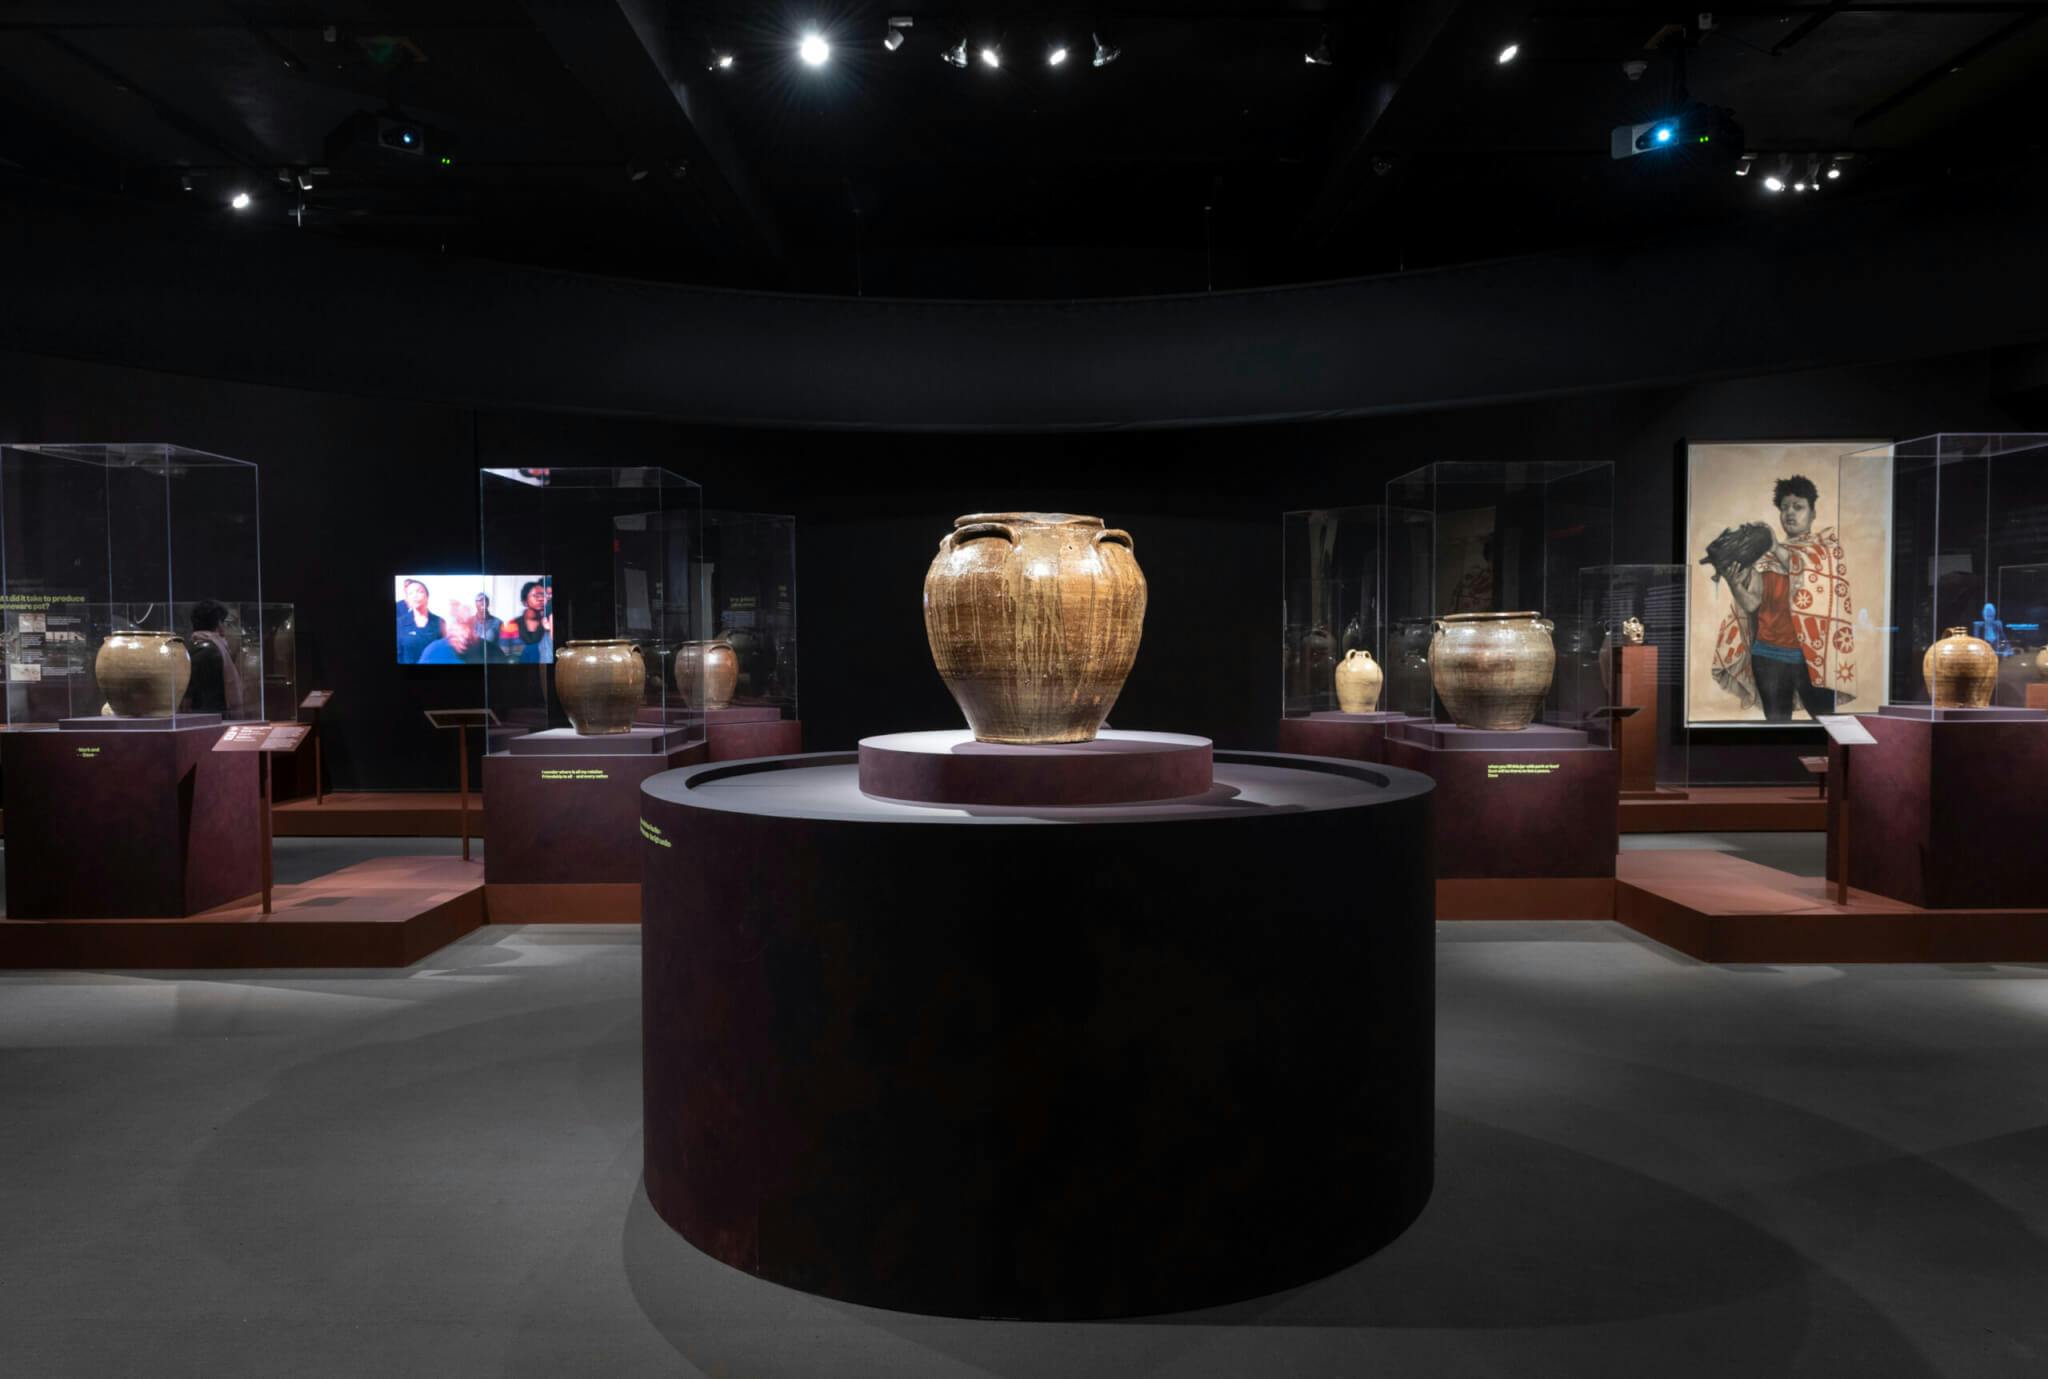 In the center of the image, a ceramic vessel stands on a black pedestal at the Museum of Fine Arts.